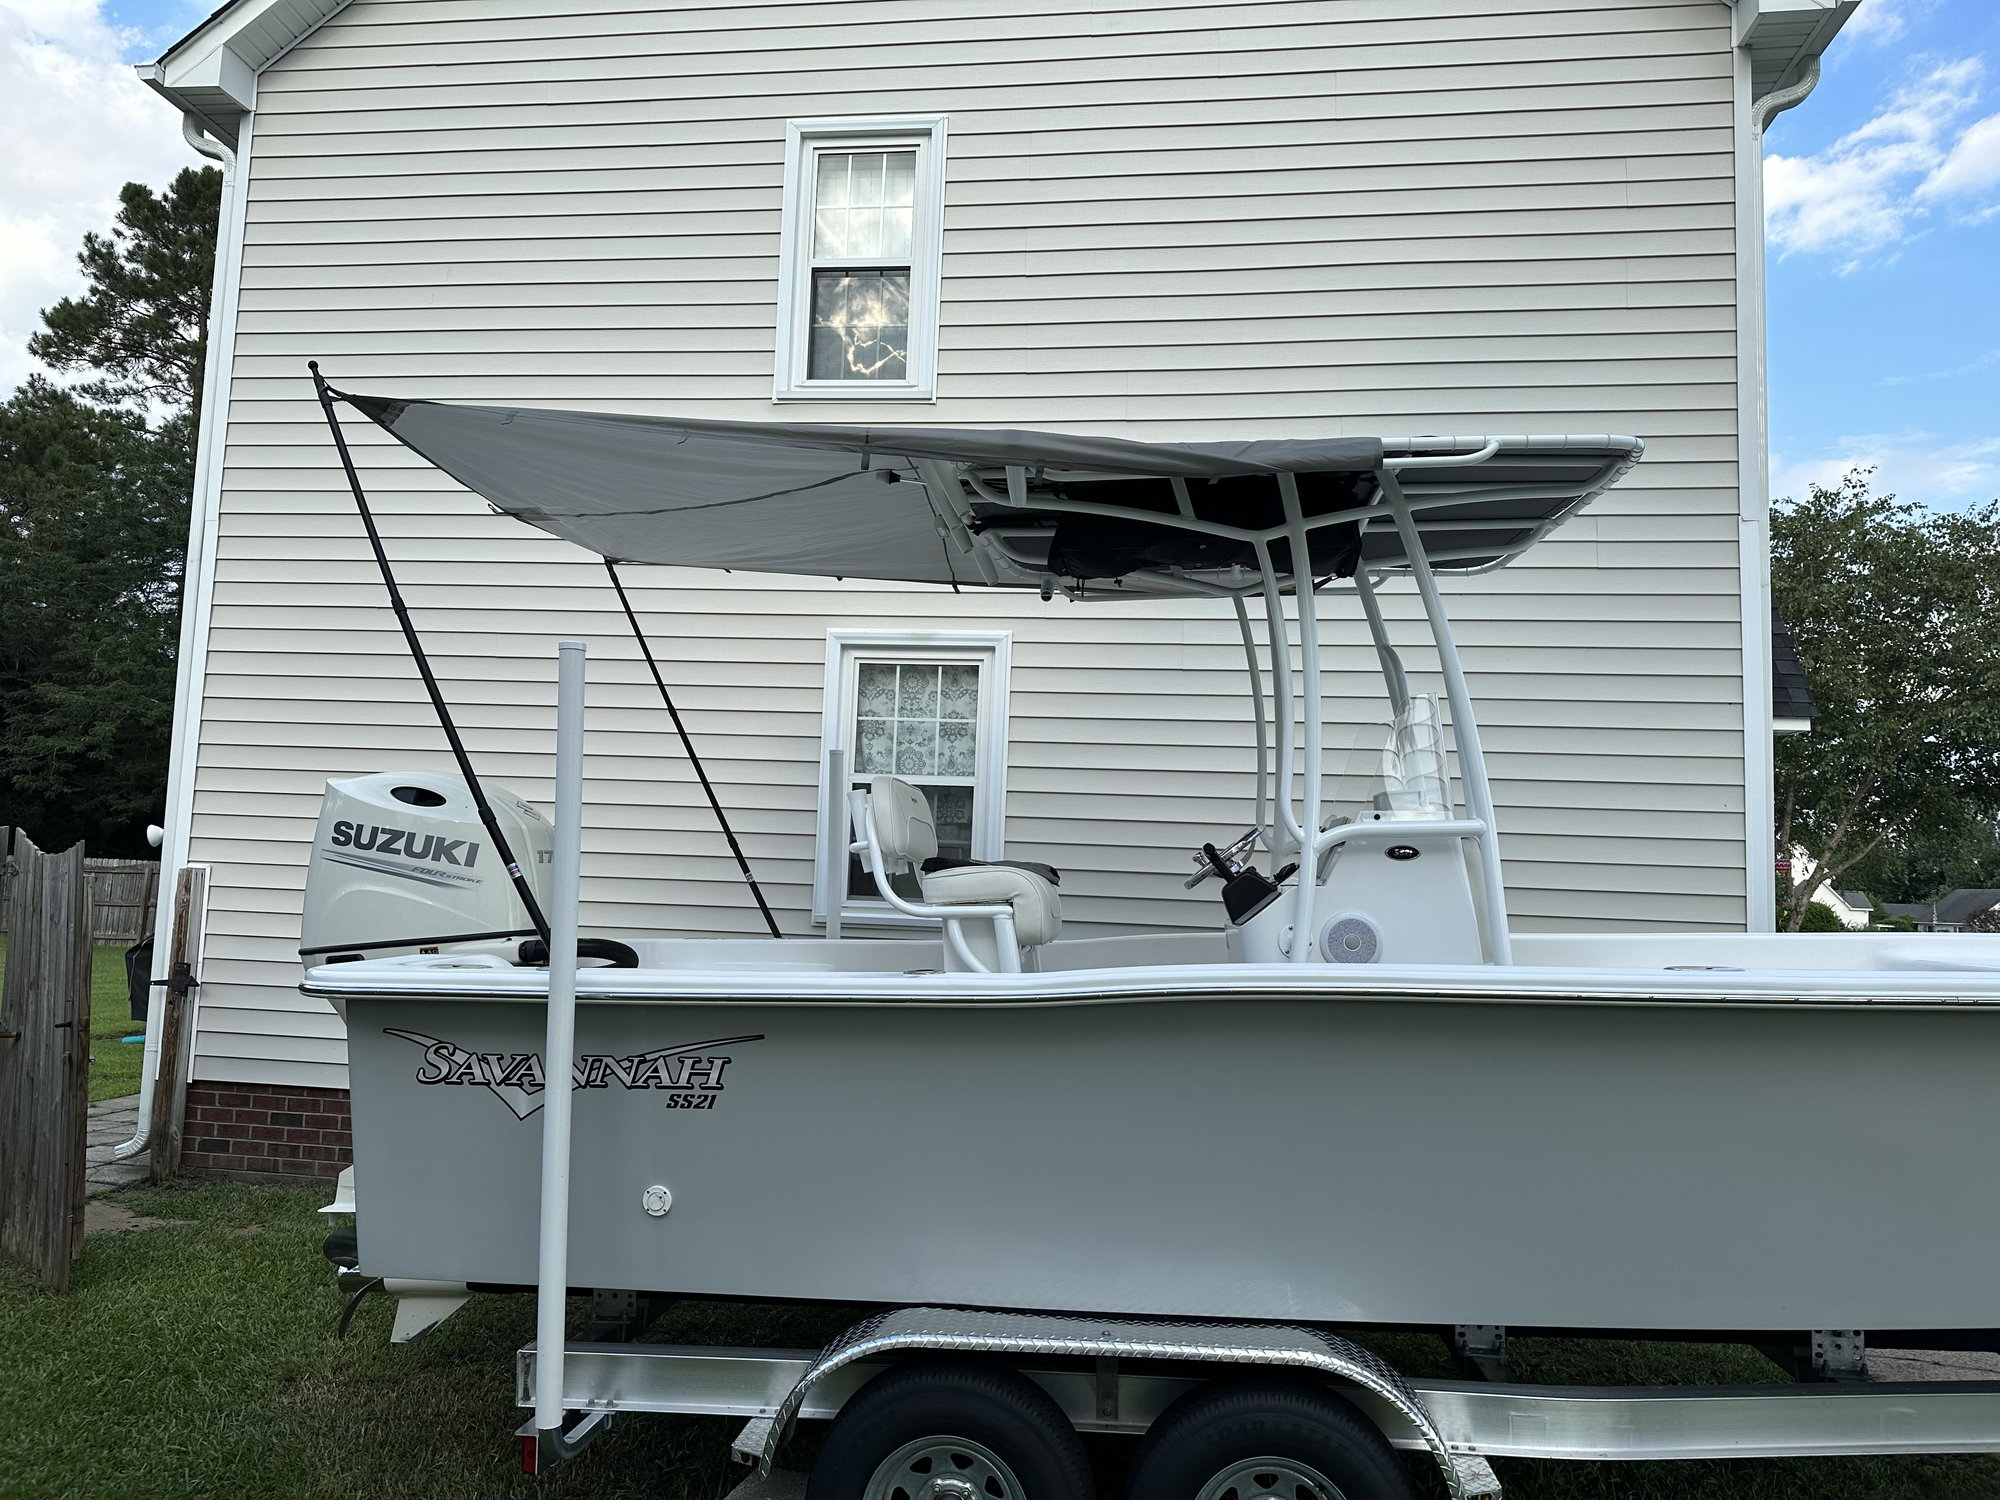 DIY sun shade, under $200 - The Hull Truth - Boating and Fishing Forum